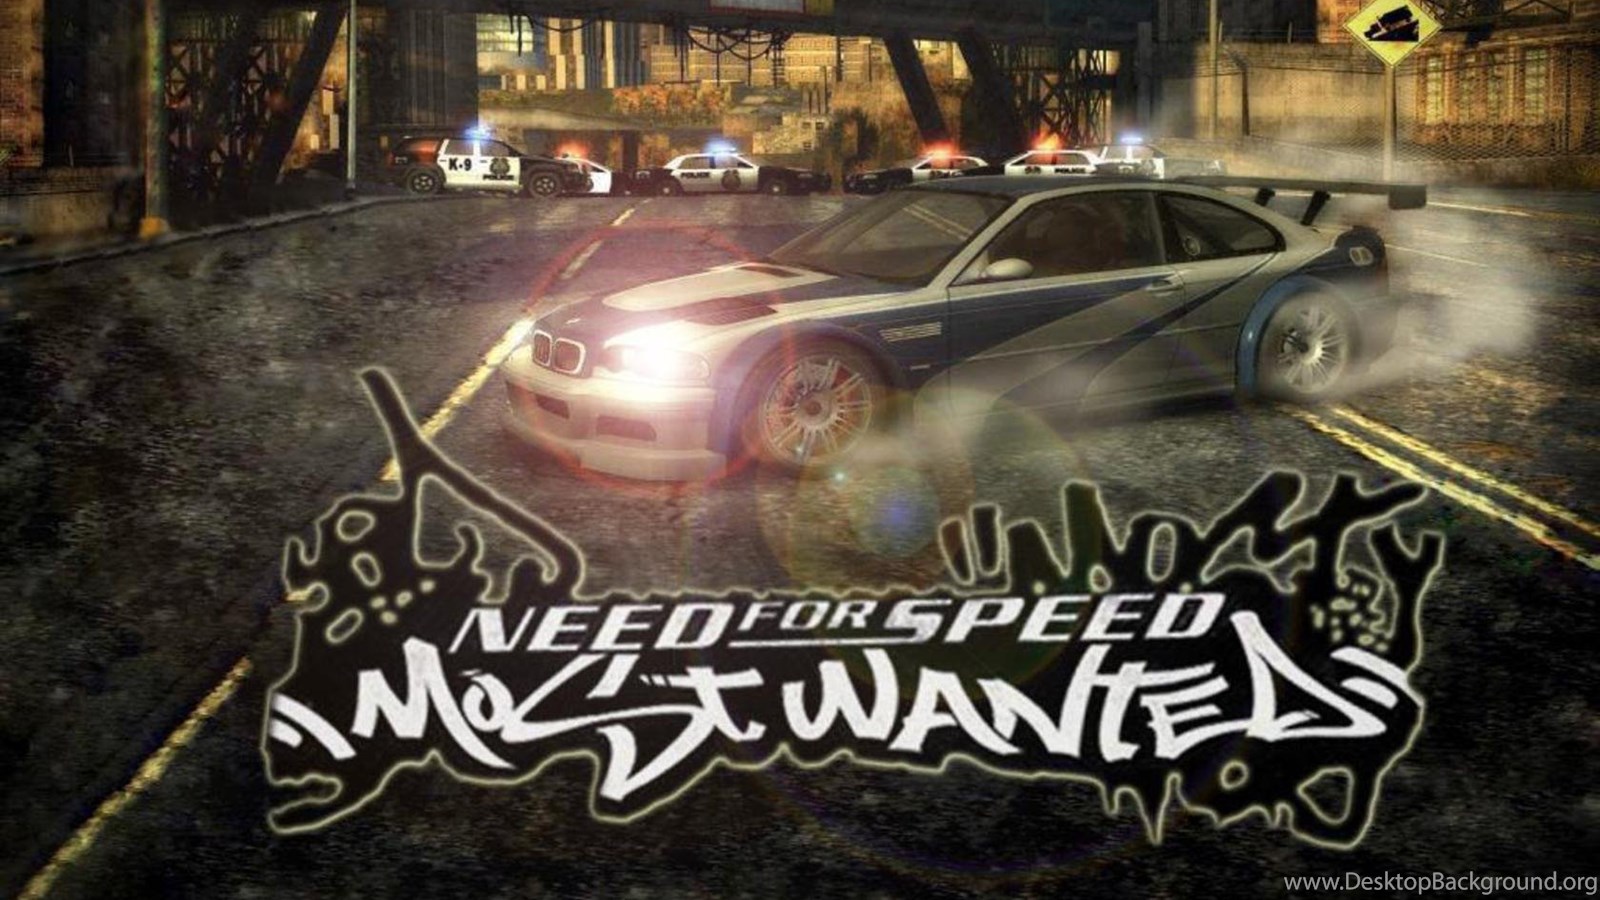 Need for speed most wanted песни. Новый NFS most wanted 2005. Most wanted 2005 геймплей. Need for Speed most wanted стрим. NFS MW 2005 Remake.